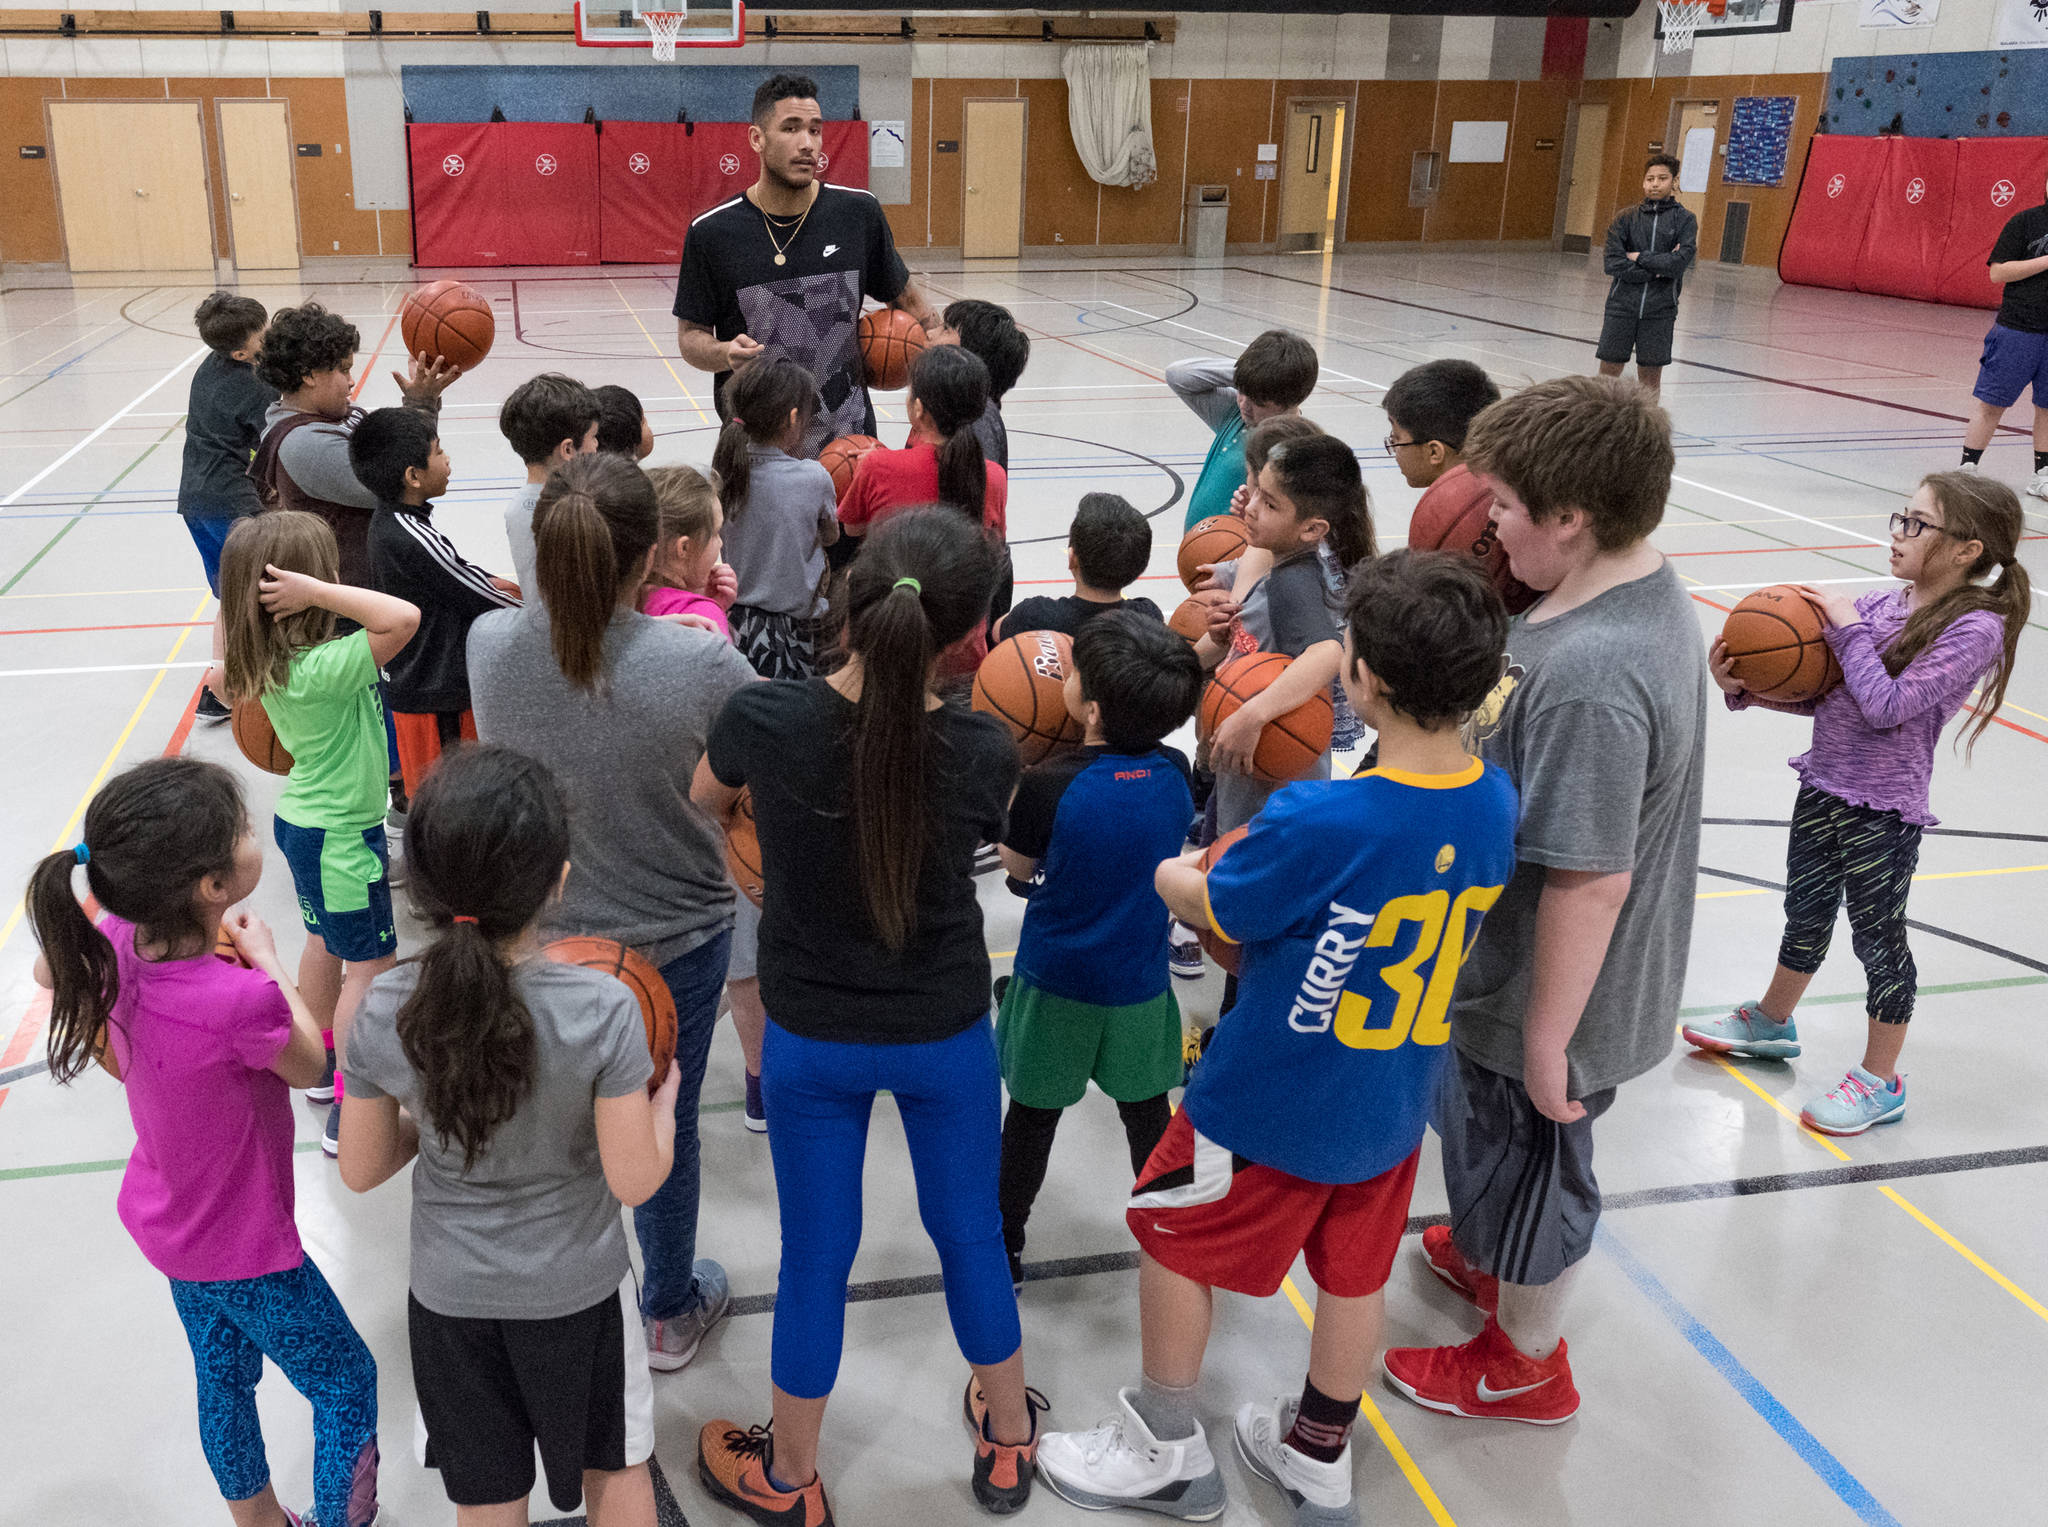 Damen Bell-Holter shares words during his basketball camp on Saturday at Floyd Dryden Middle School. The camp was a partnership with Sealaska and Central Council of Tlingit & Haida Indian Tribes of Alaska. (Konrad Frank | For the Juneau Empire)